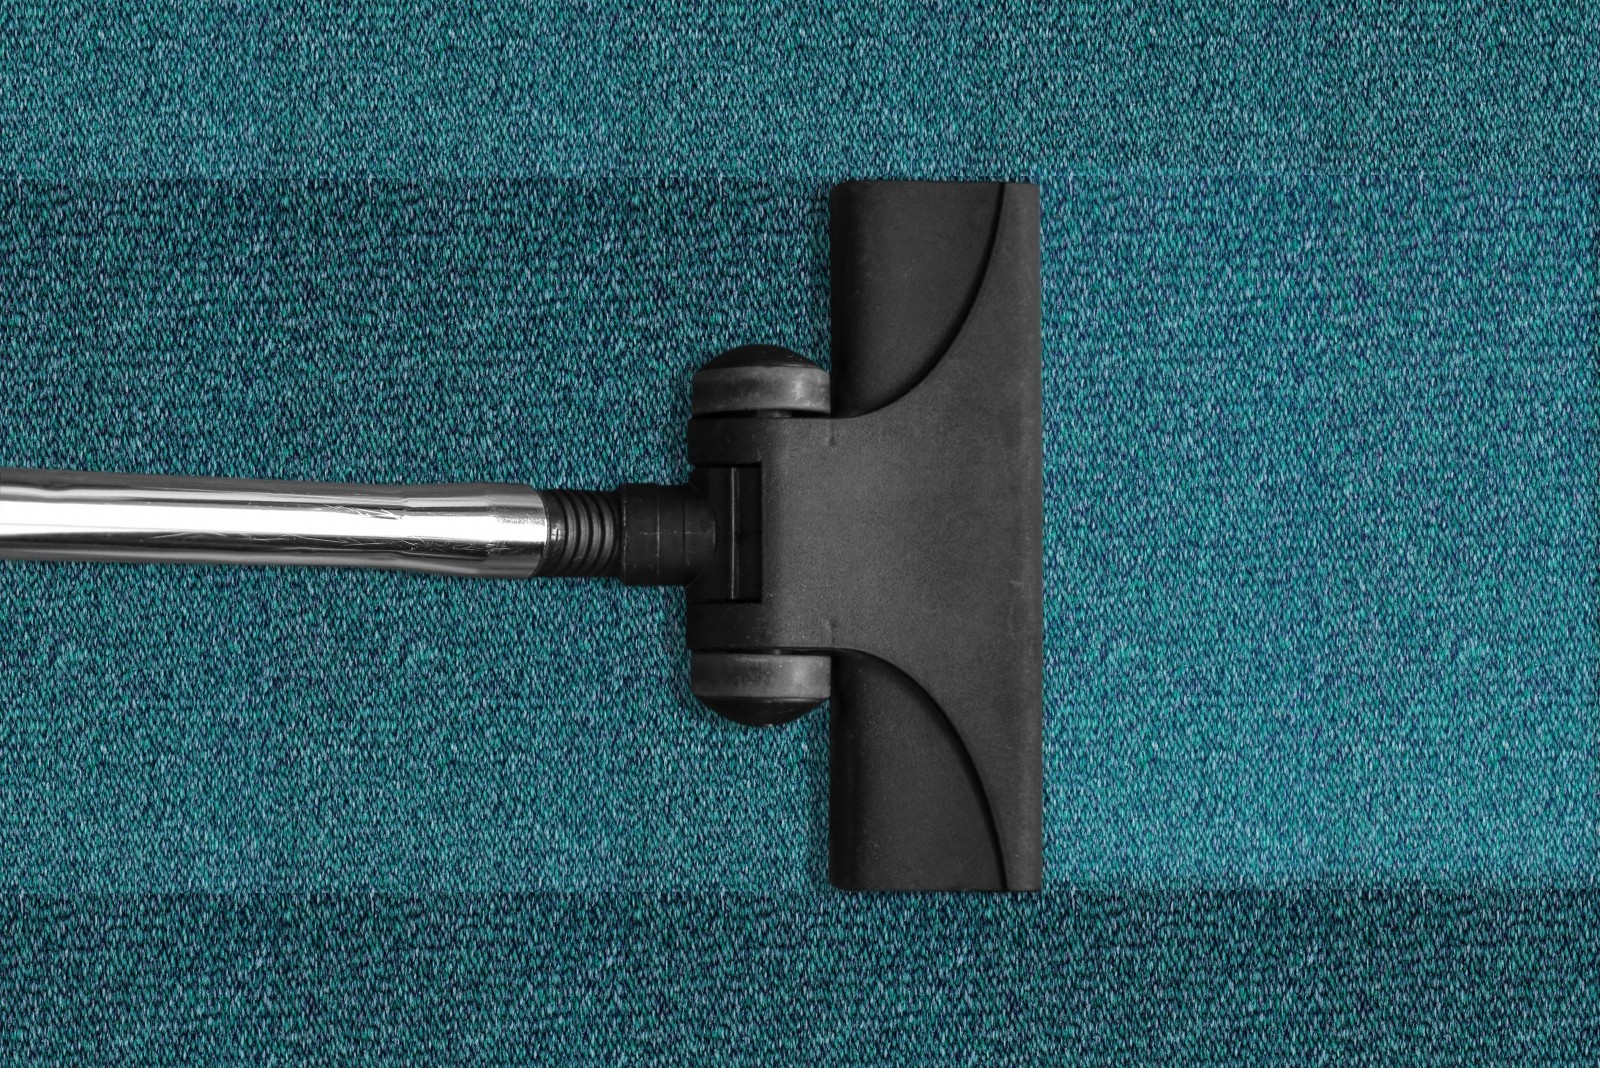 A vacuum cleaner on a blue rug